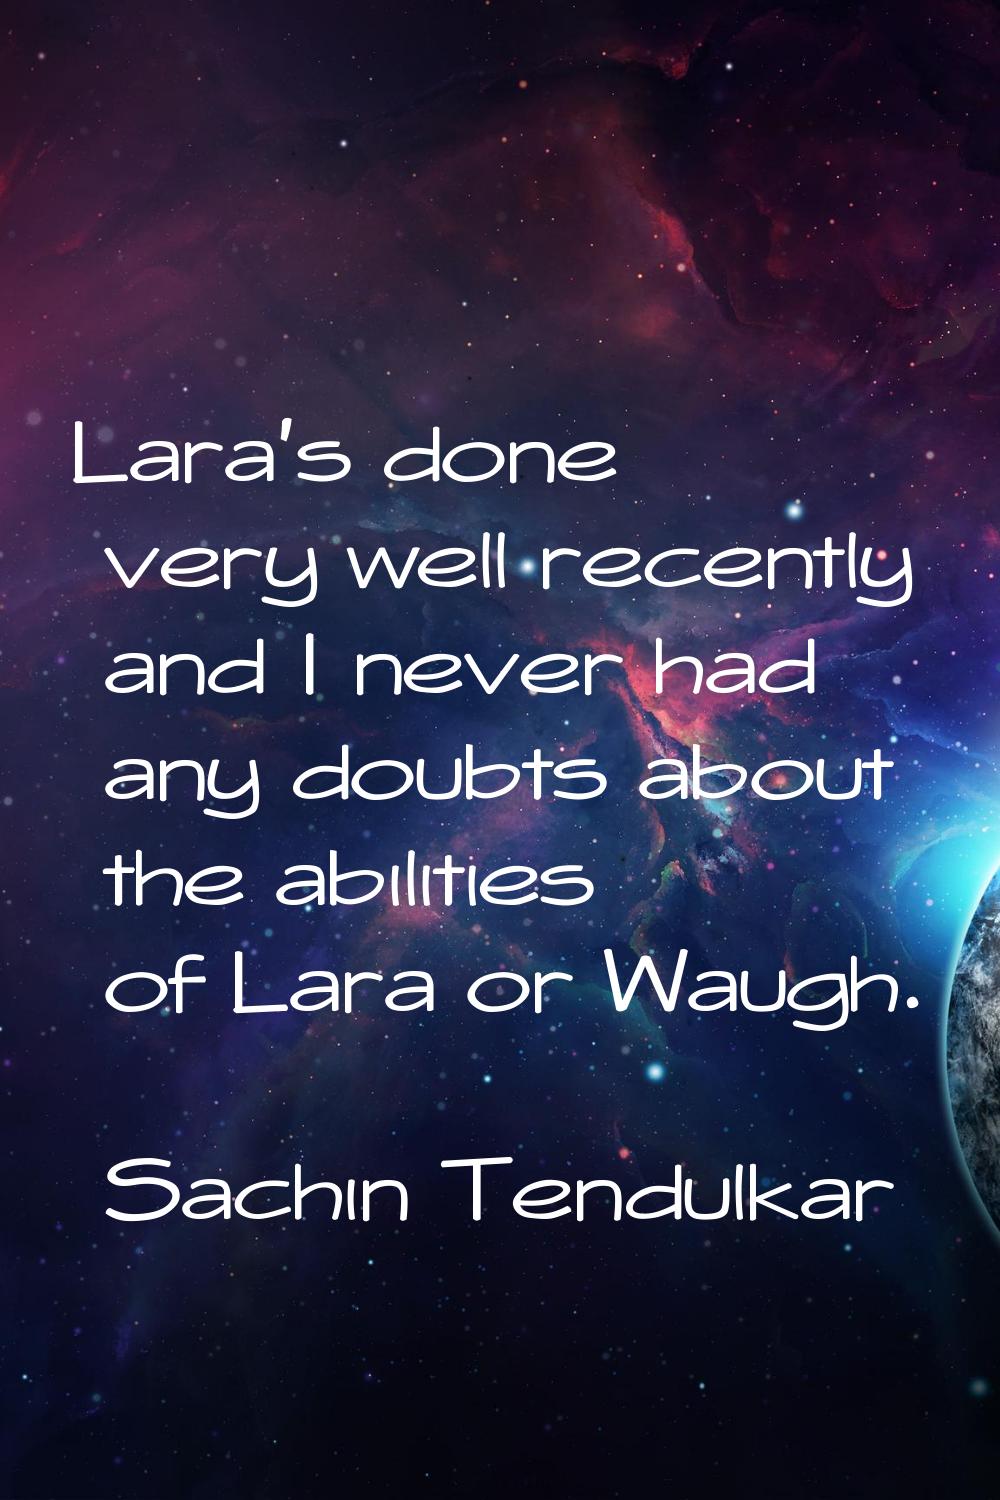 Lara's done very well recently and I never had any doubts about the abilities of Lara or Waugh.